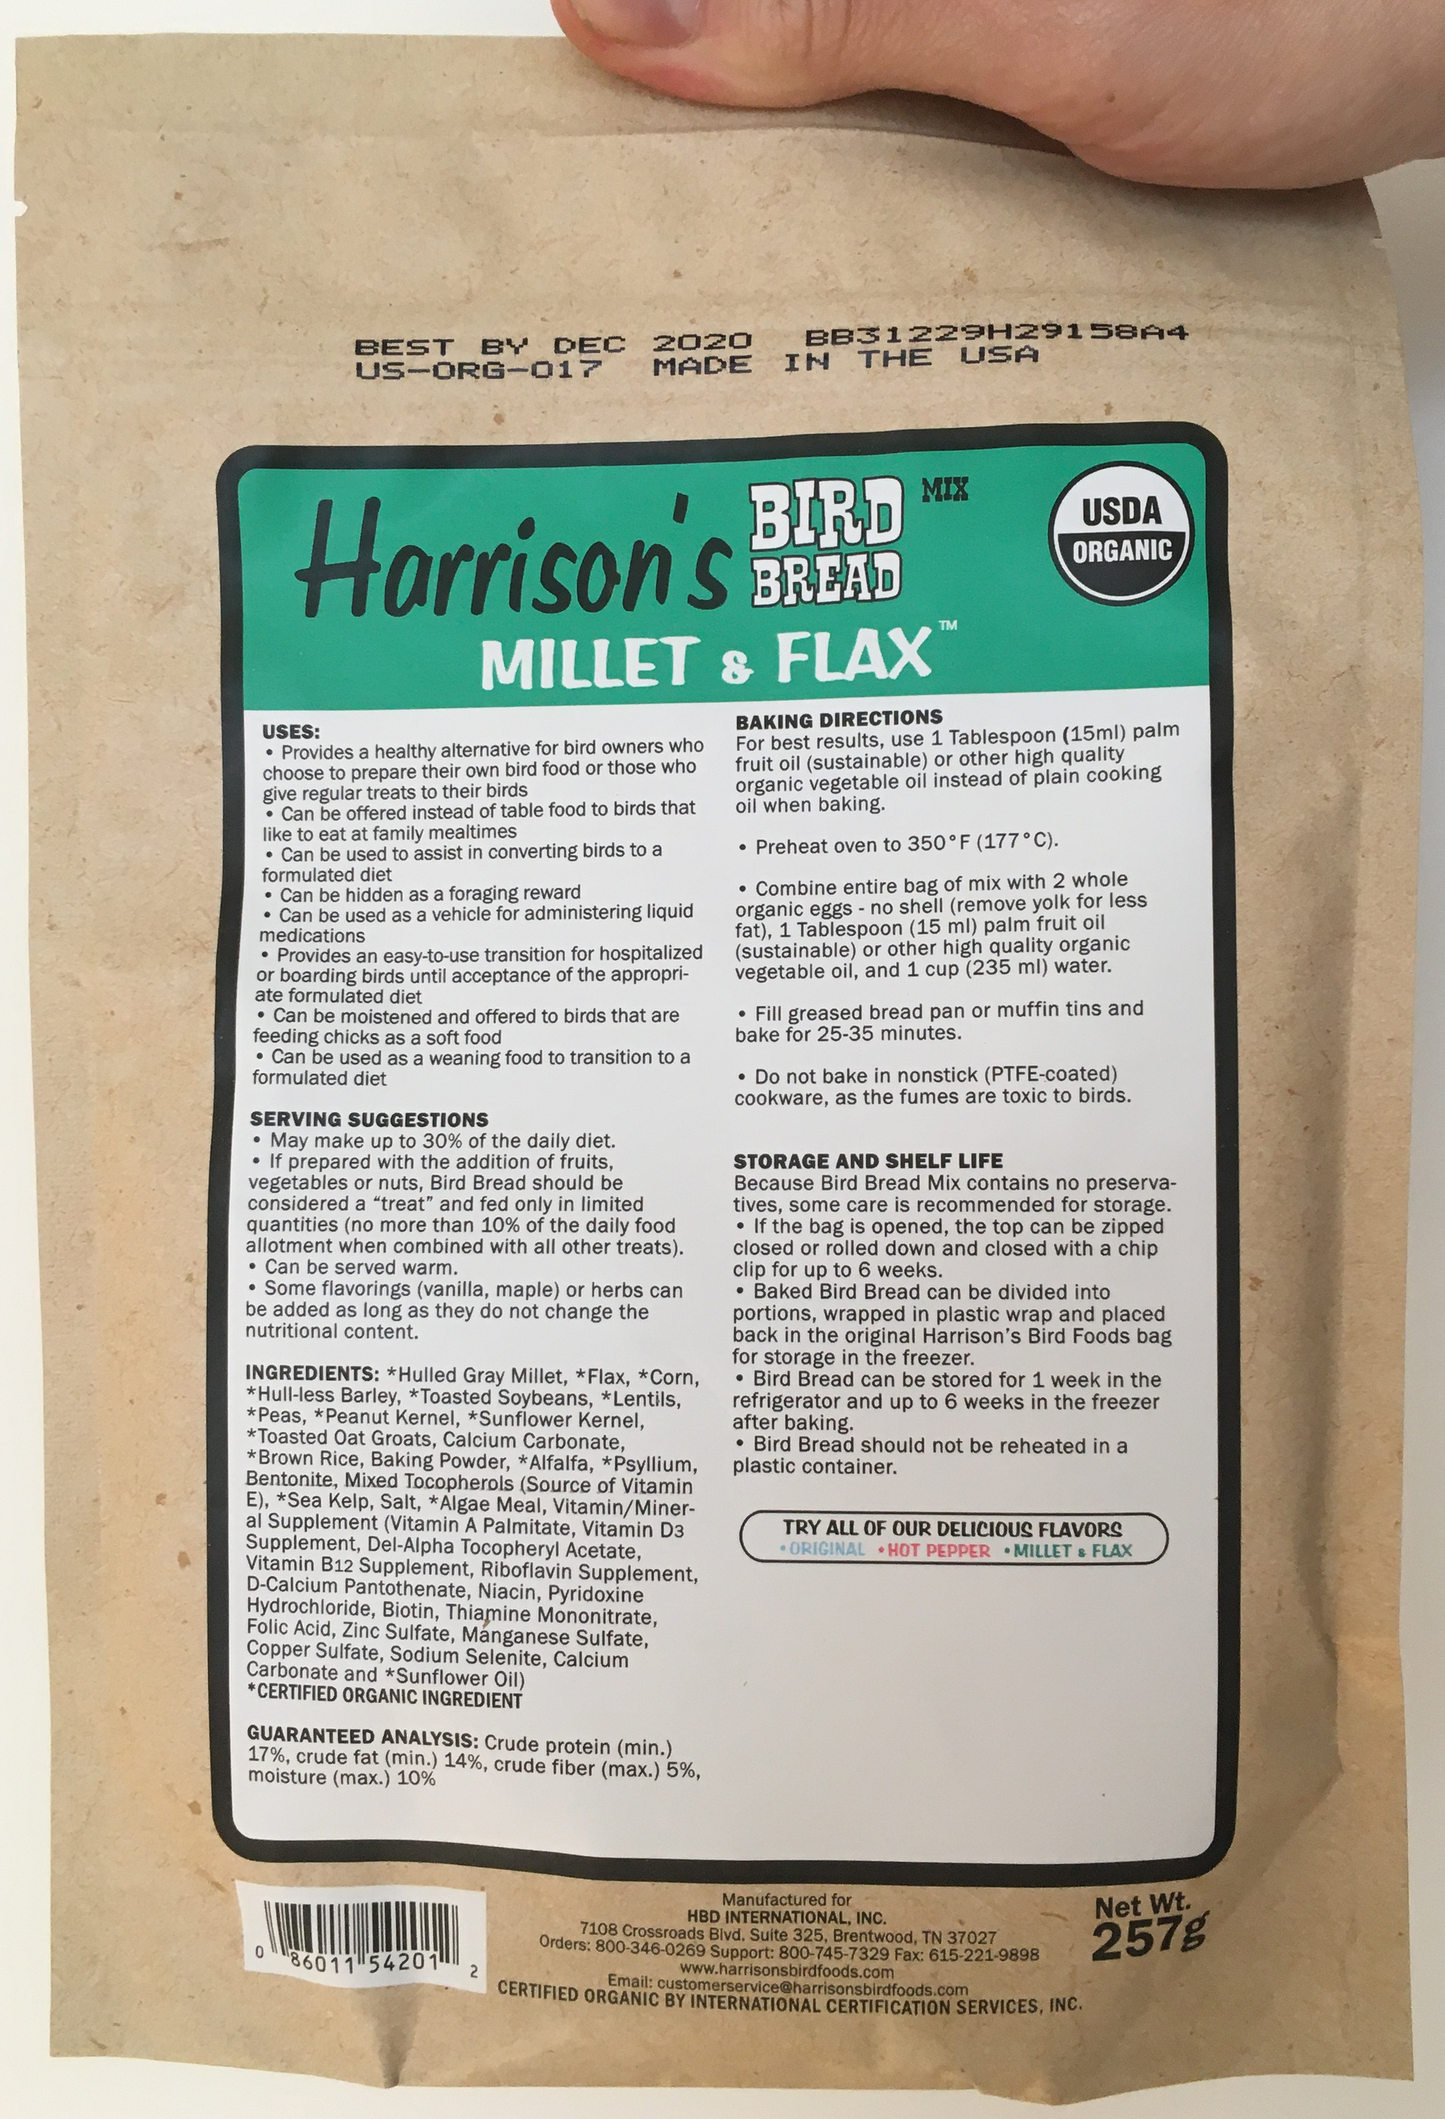 back of the green bag of Harrison's Bake at home bird bread mix in Millet and Flax variety, with baking instructions